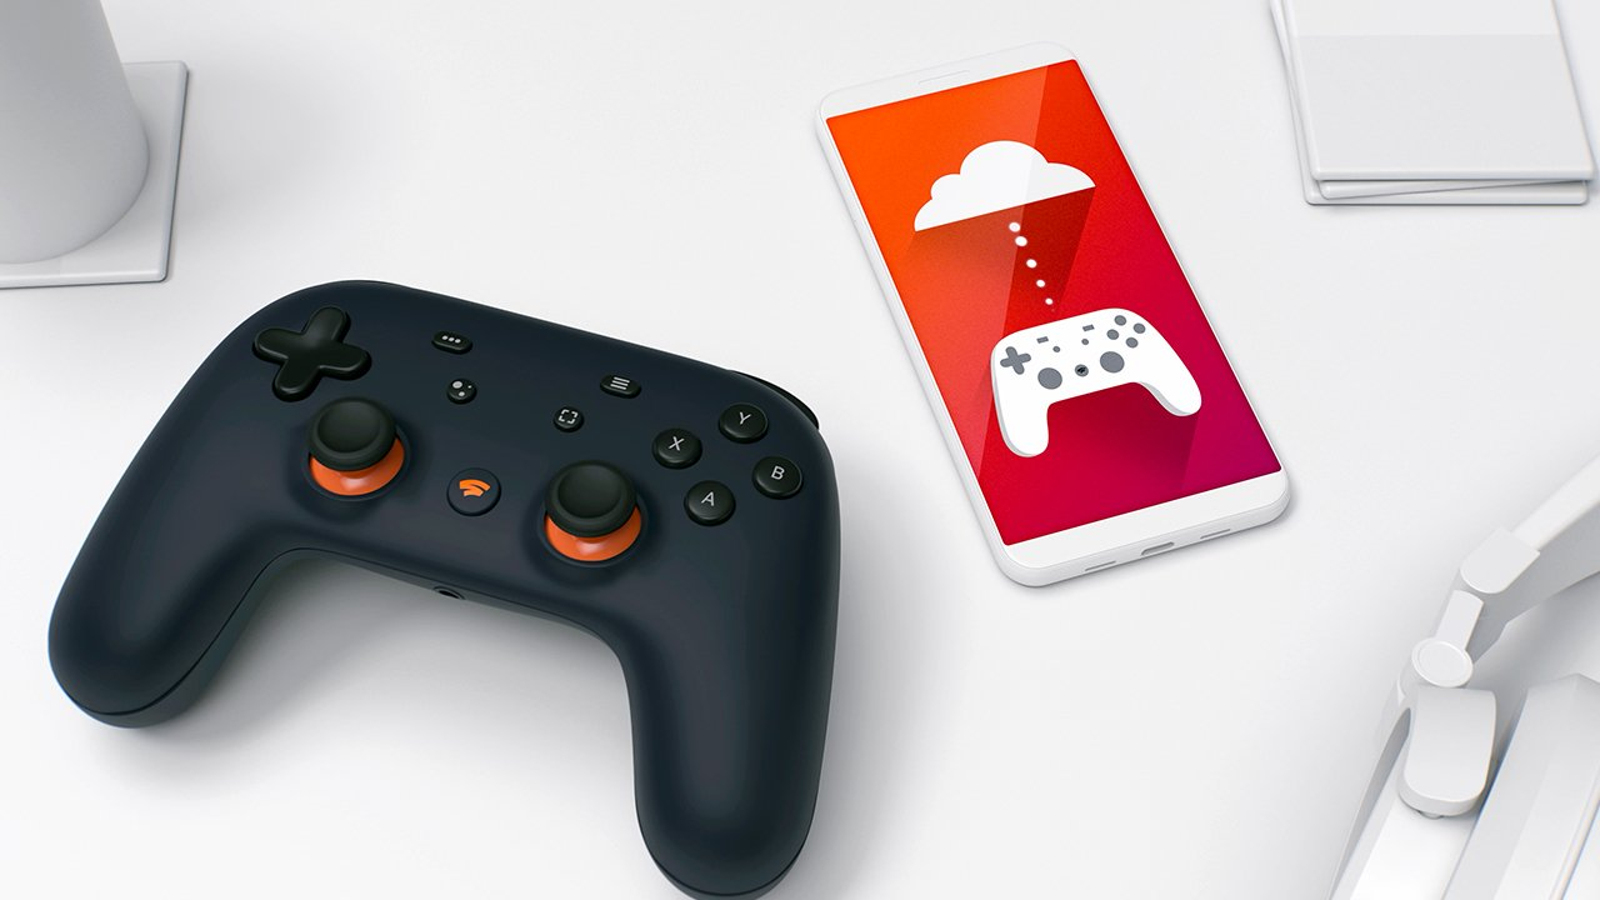 Search function finally arrives at Stadia for web, future updates